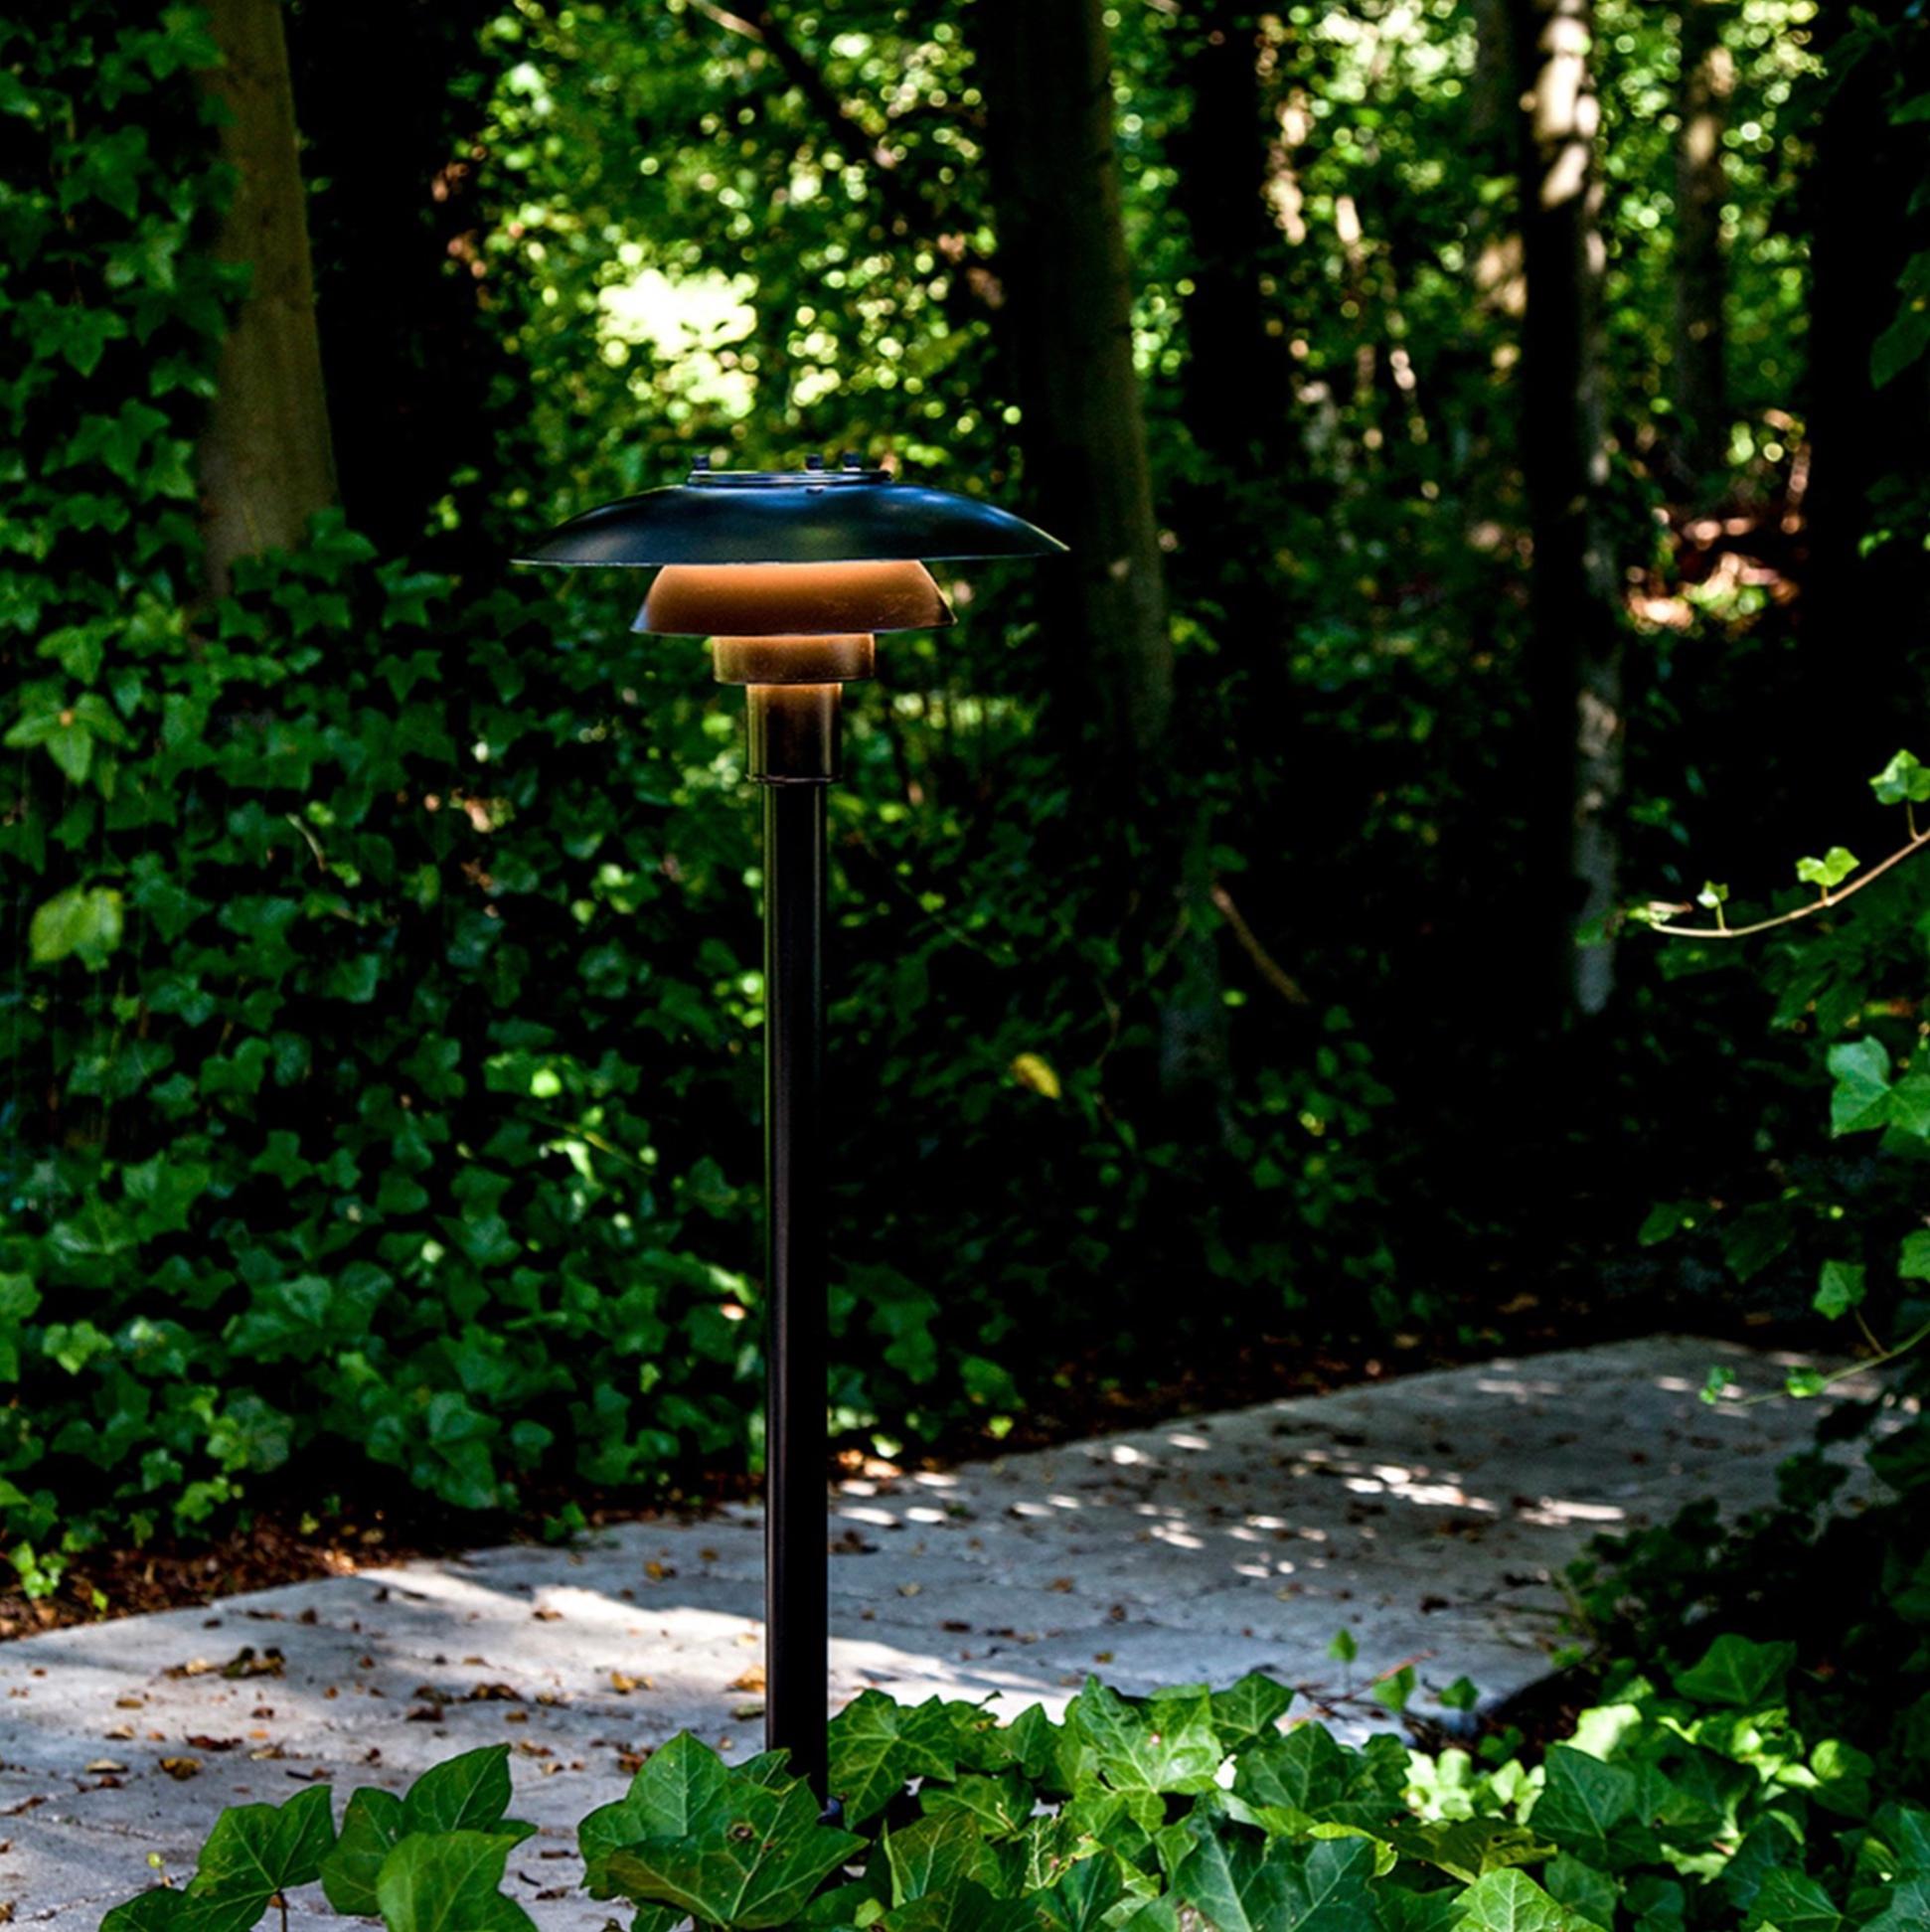 Poul Henningsen PH 3-2½ Bollard Outdoor Light Set of 3. New, current production.

Poul Henningsen designed the three-shade system back in 1925-1926. The first lights using the system were designed by PH in cooperation with Louis Poulsen for an